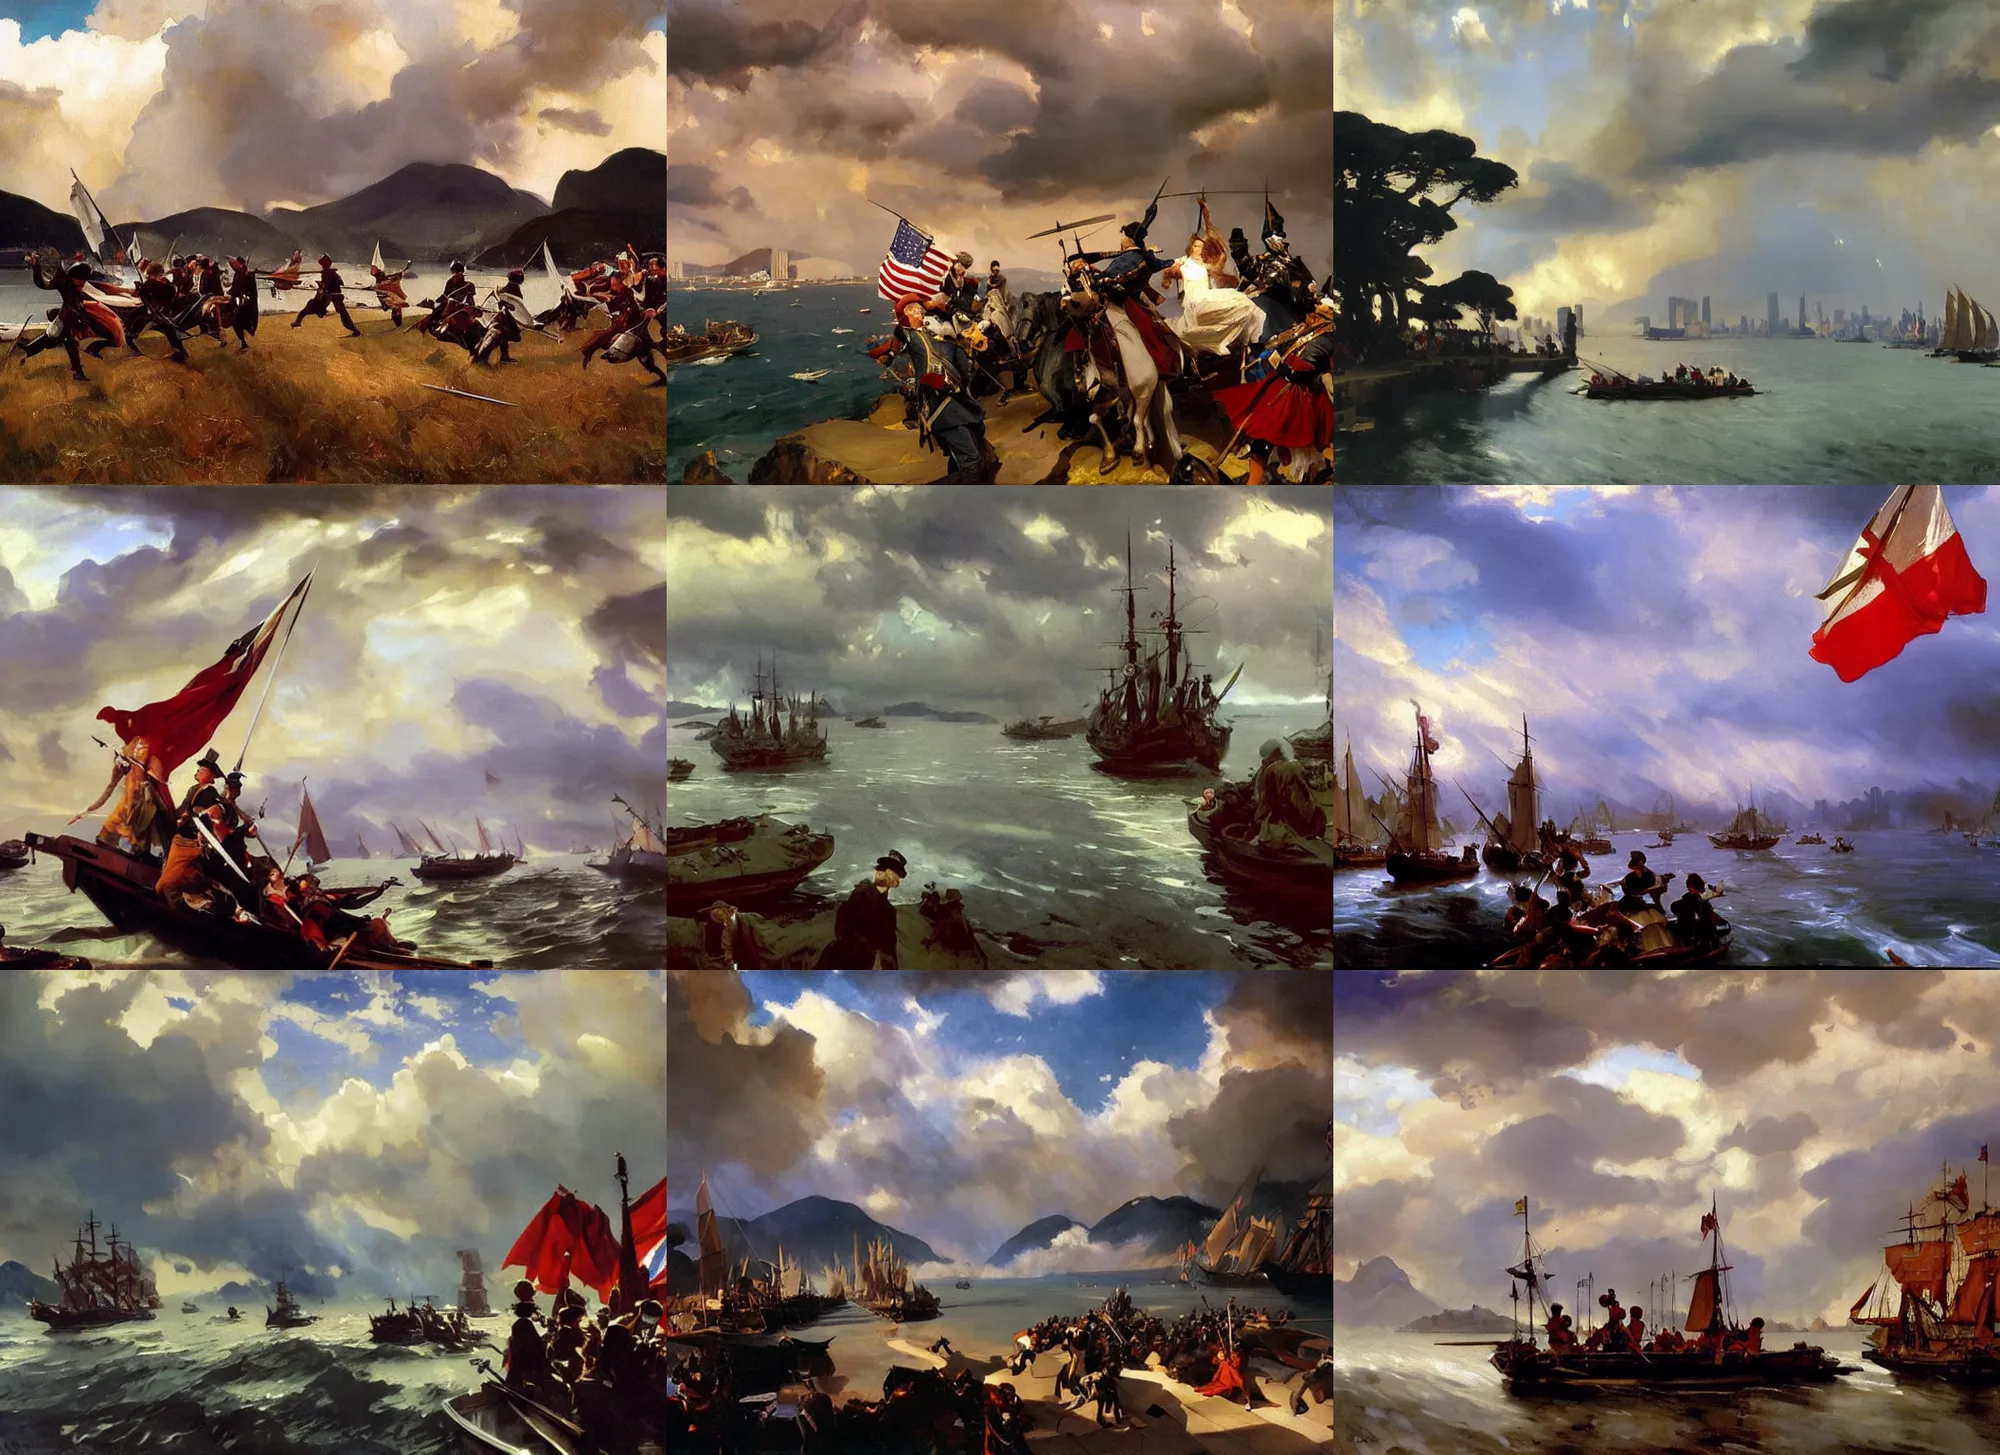 Prompt: painting by sargent and leyendecker and greg hildebrandt savrasov levitan autumn epic sky overcast, low thunder clouds hong kong victoria harbour in 1 8 th century, epic battle, navy, knights, wizards, sword, magic, fantasy, lotr, game of thrones, british flag waving